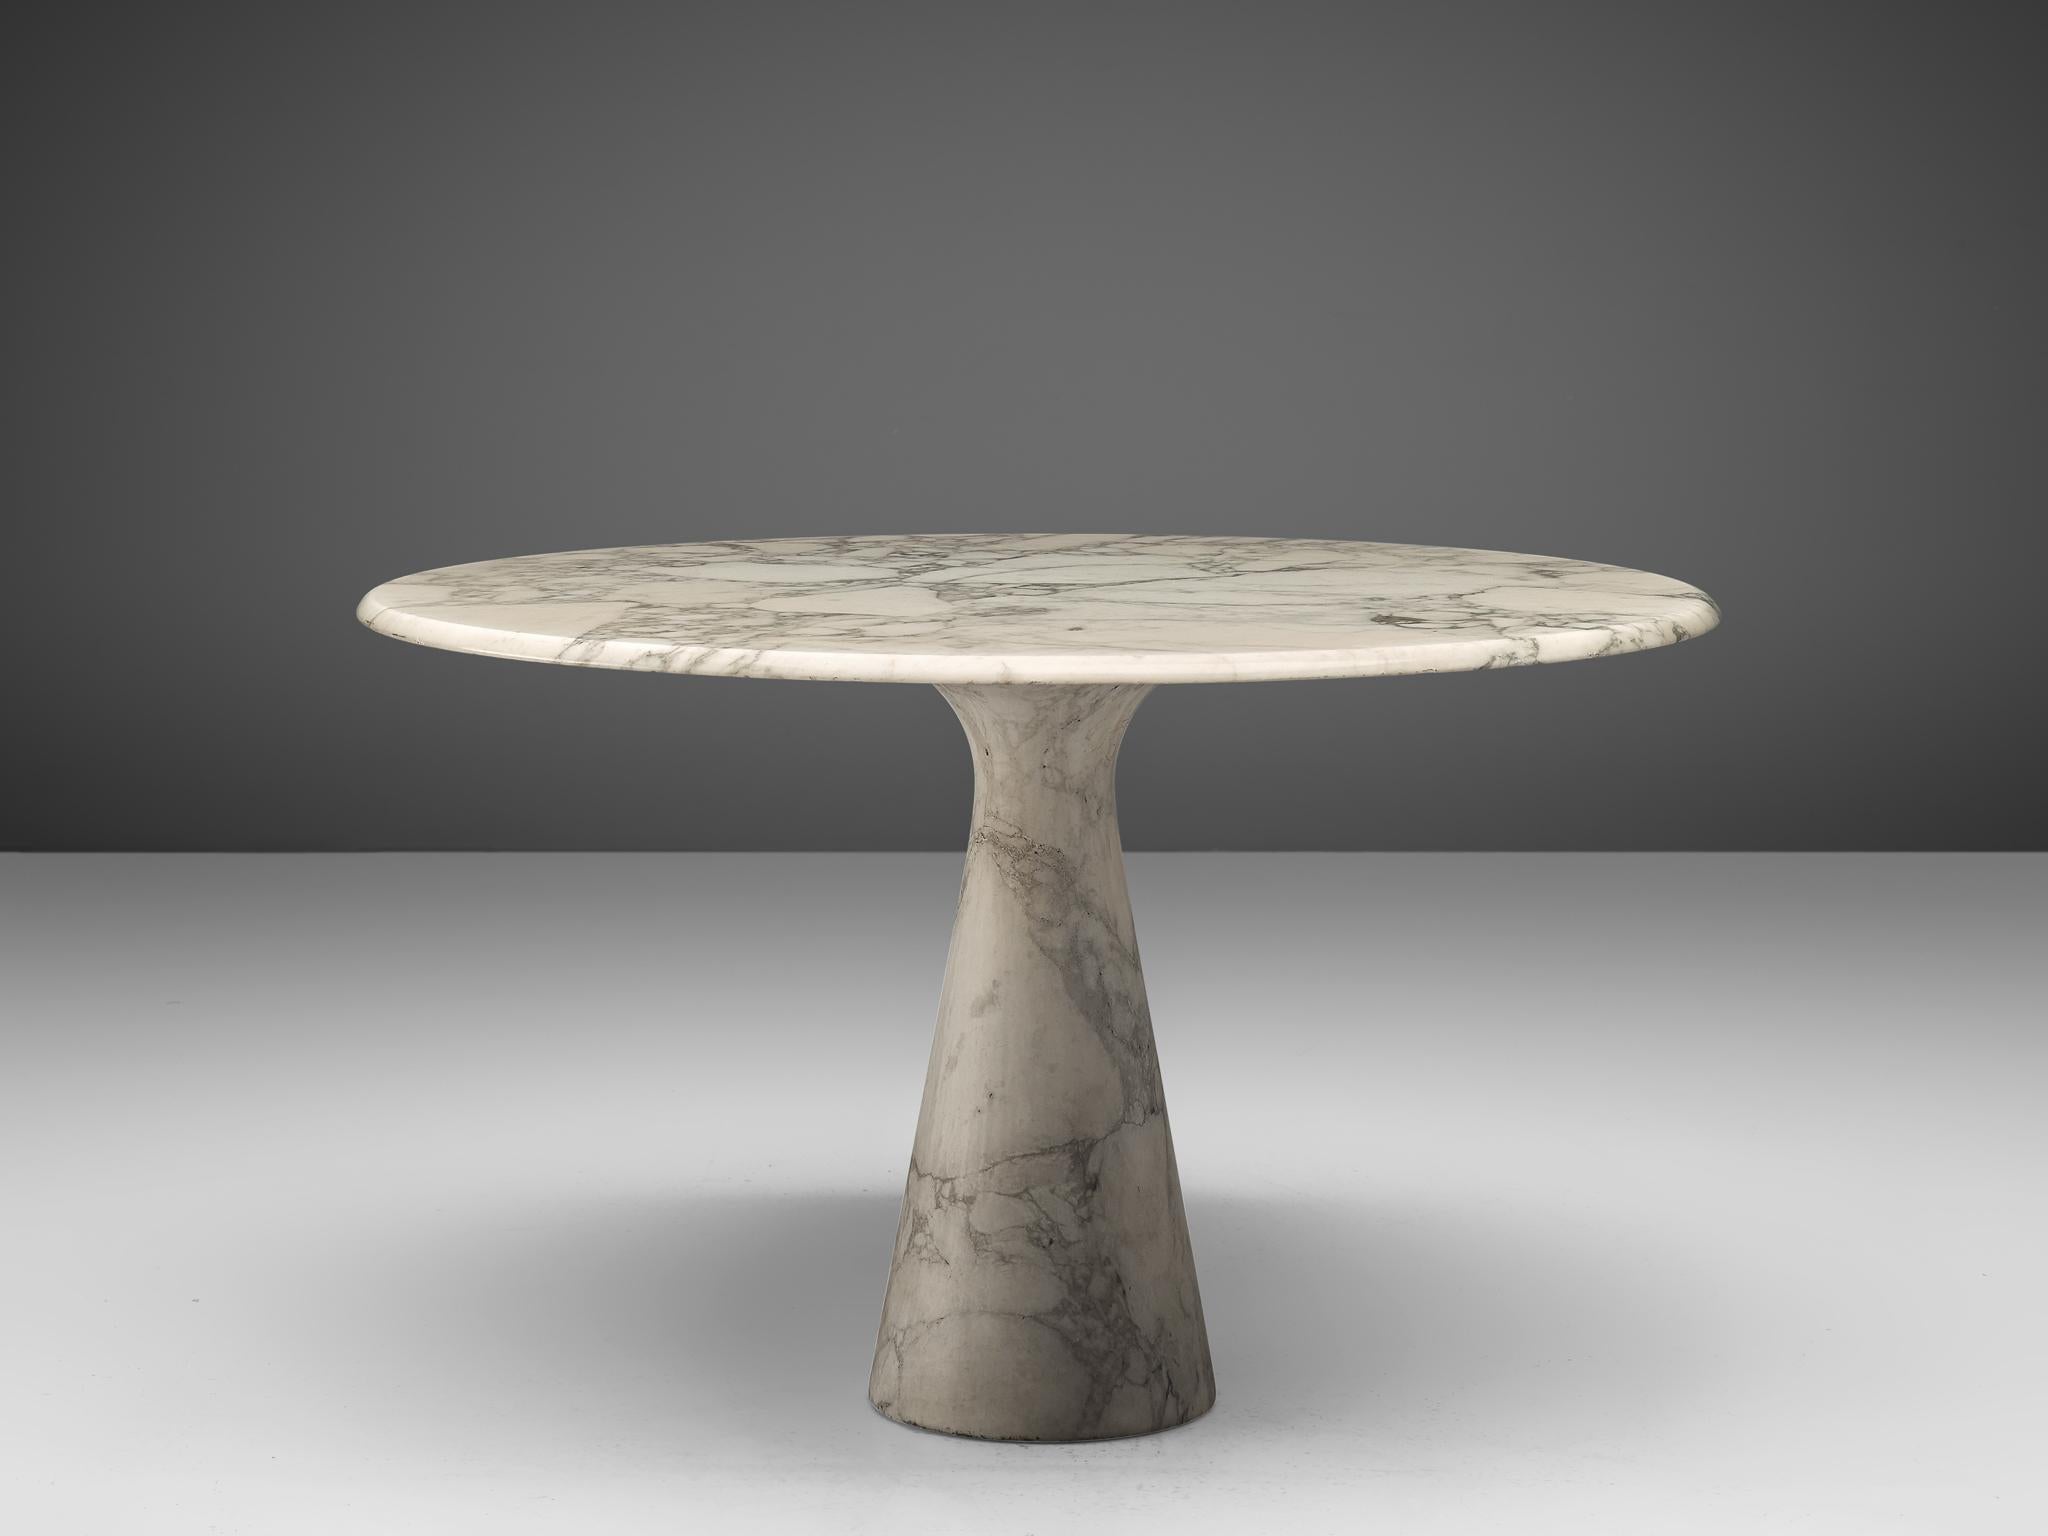 Angelo Mangiarotti for Skipper, 'M1' dining table, marble, Italy, design 1969

Angelo Mangiarotti designed the 'M1' dining table for Skipper in 1969. On a cone shaped pedestal rests the round tabletop. The white marble shows a dynamic grain and so